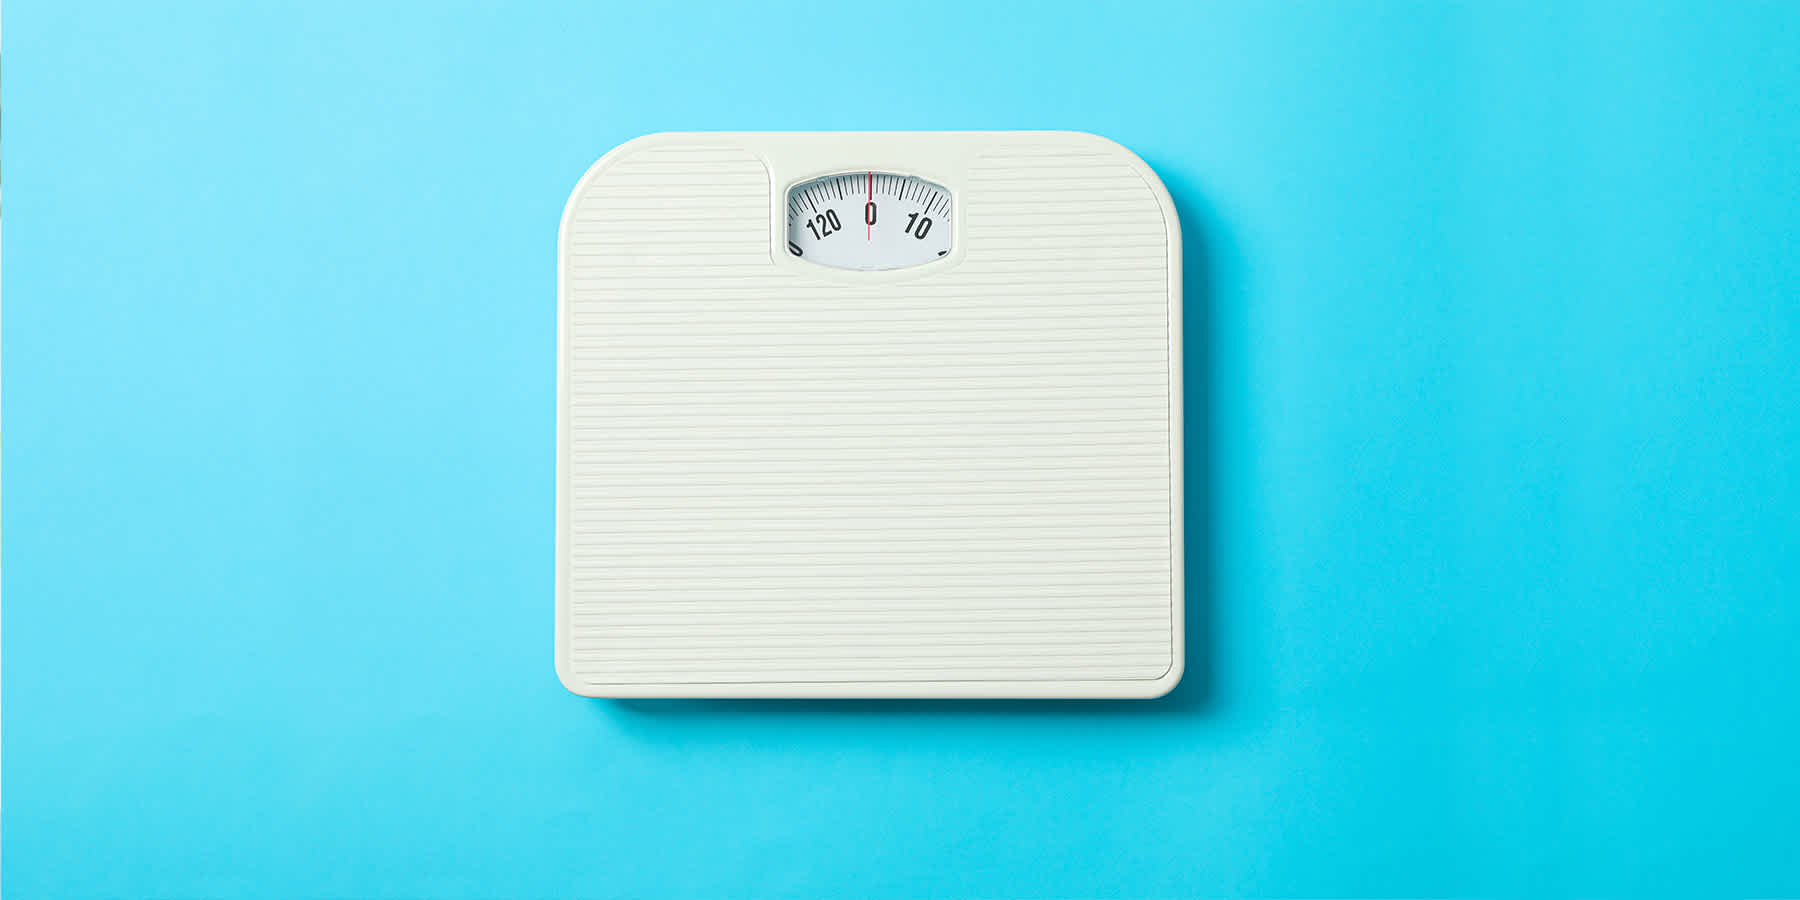 Bathroom scale for weight loss with a blue background